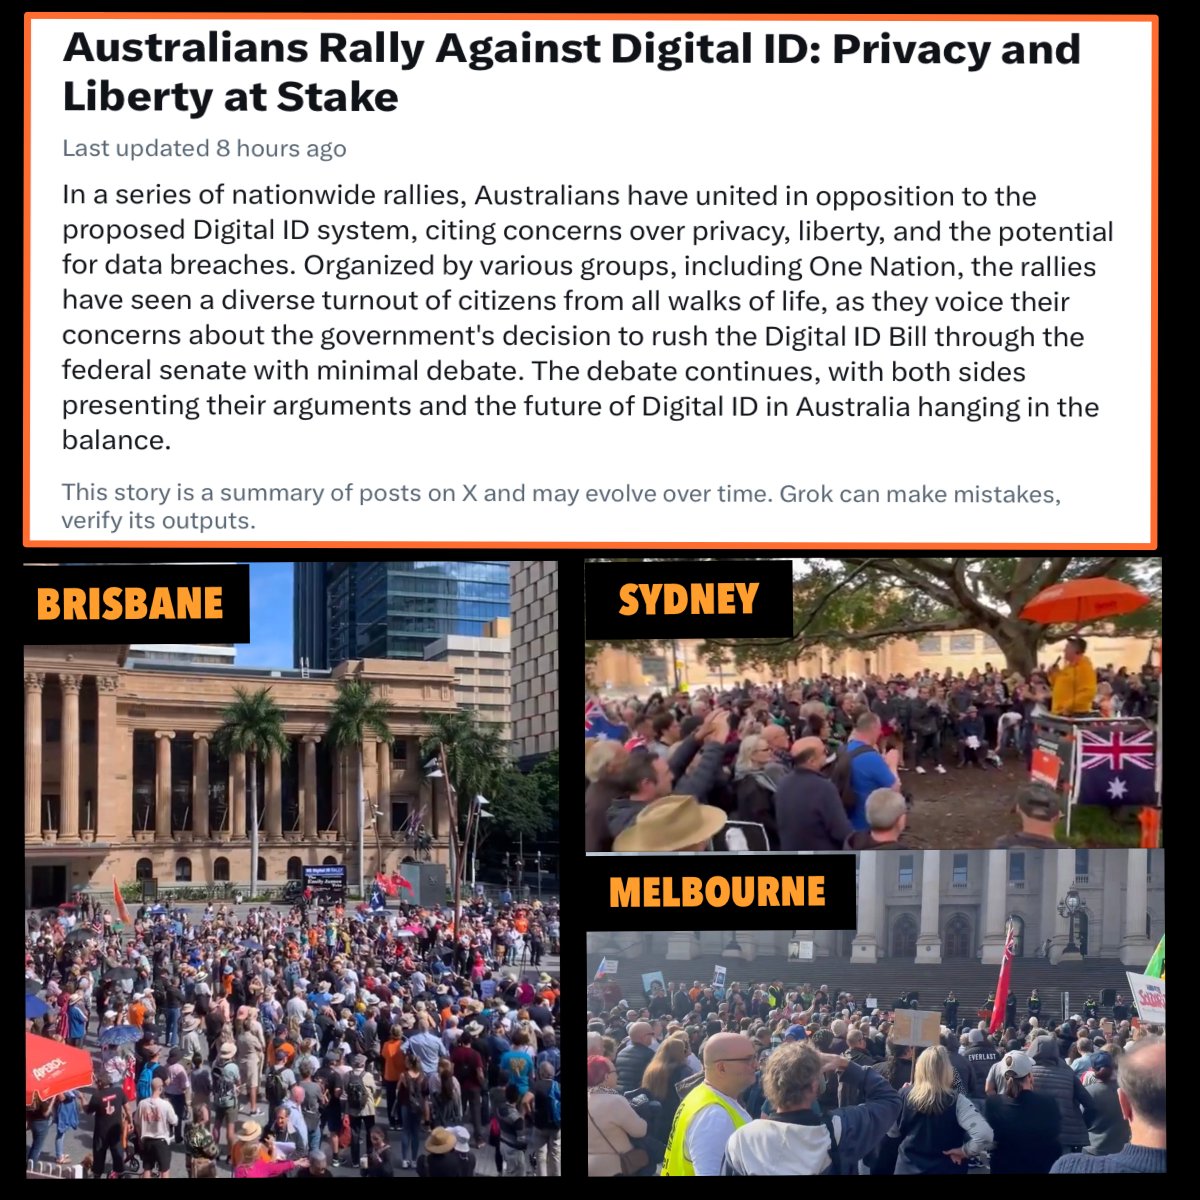 Great turn out nationwide at yesterday’s rallies against the Digital ID Bill and to Save Freedom of Speech - especially in Sydney where the BOM had predicted torrential rainfall that surprisingly didn’t eventuate. And while Grok is covering it on Twitter, as expected there is…